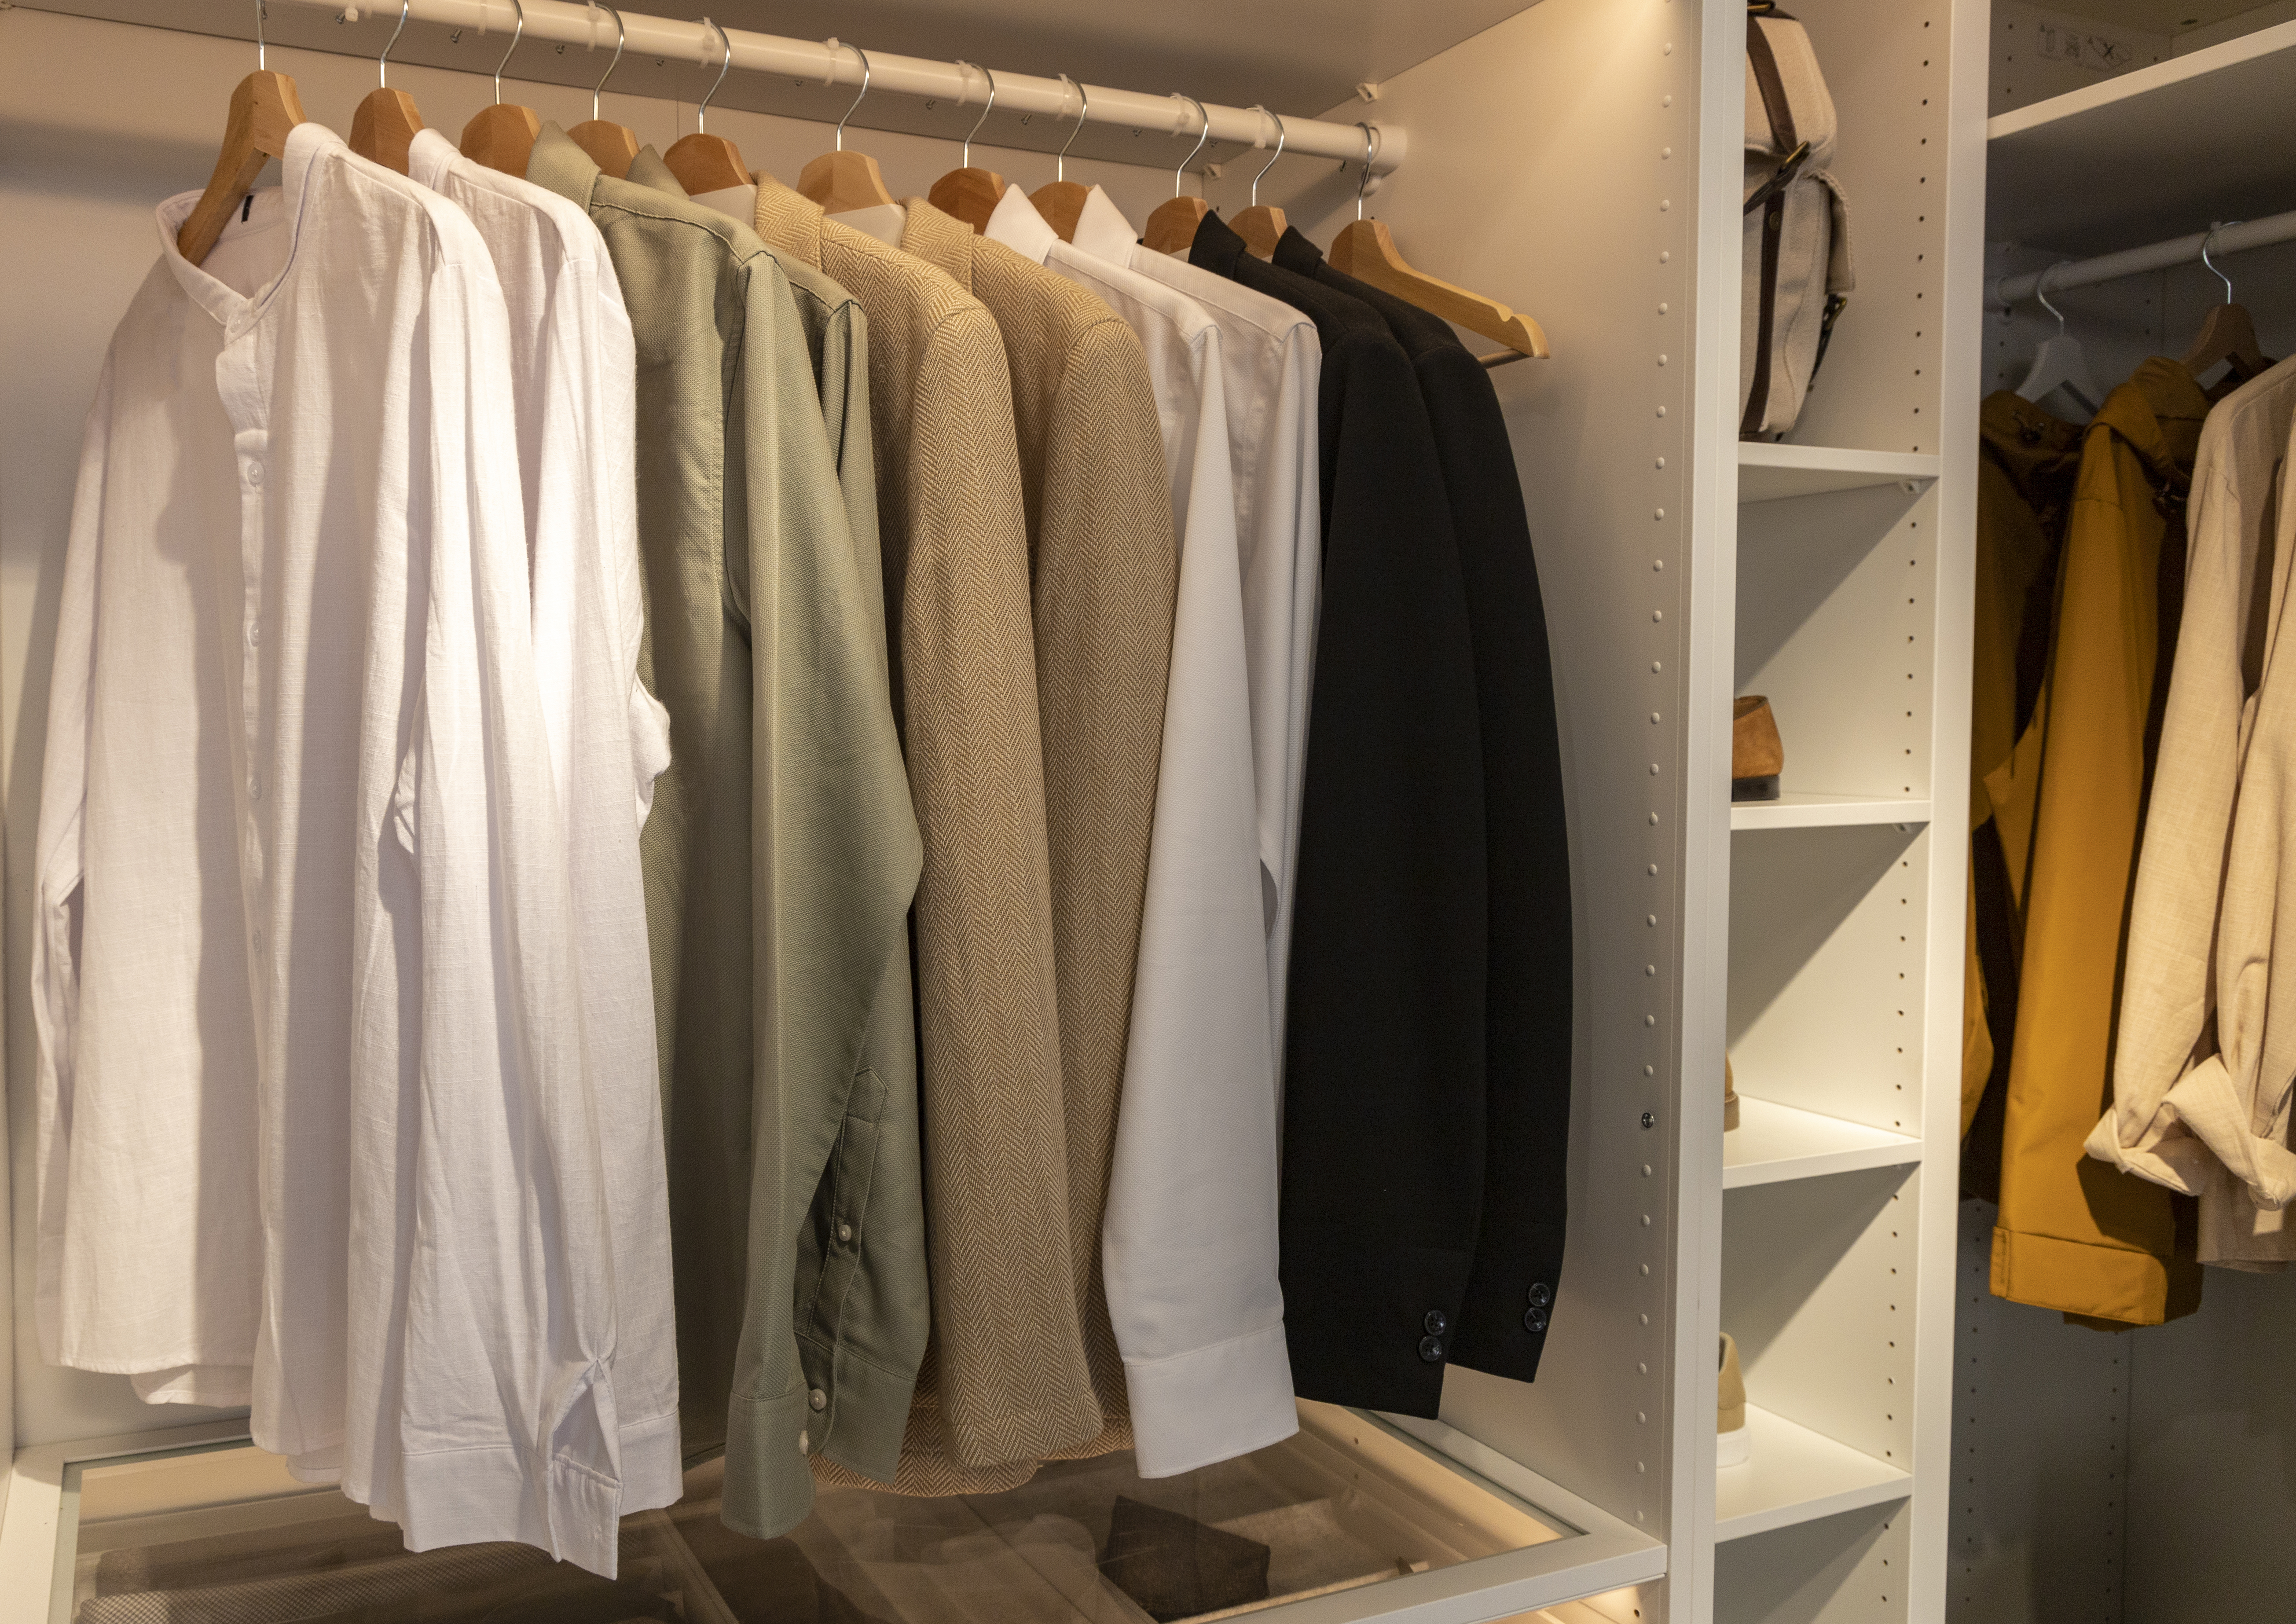 Closet Rod Height: What Is the Proper Height for Installation?